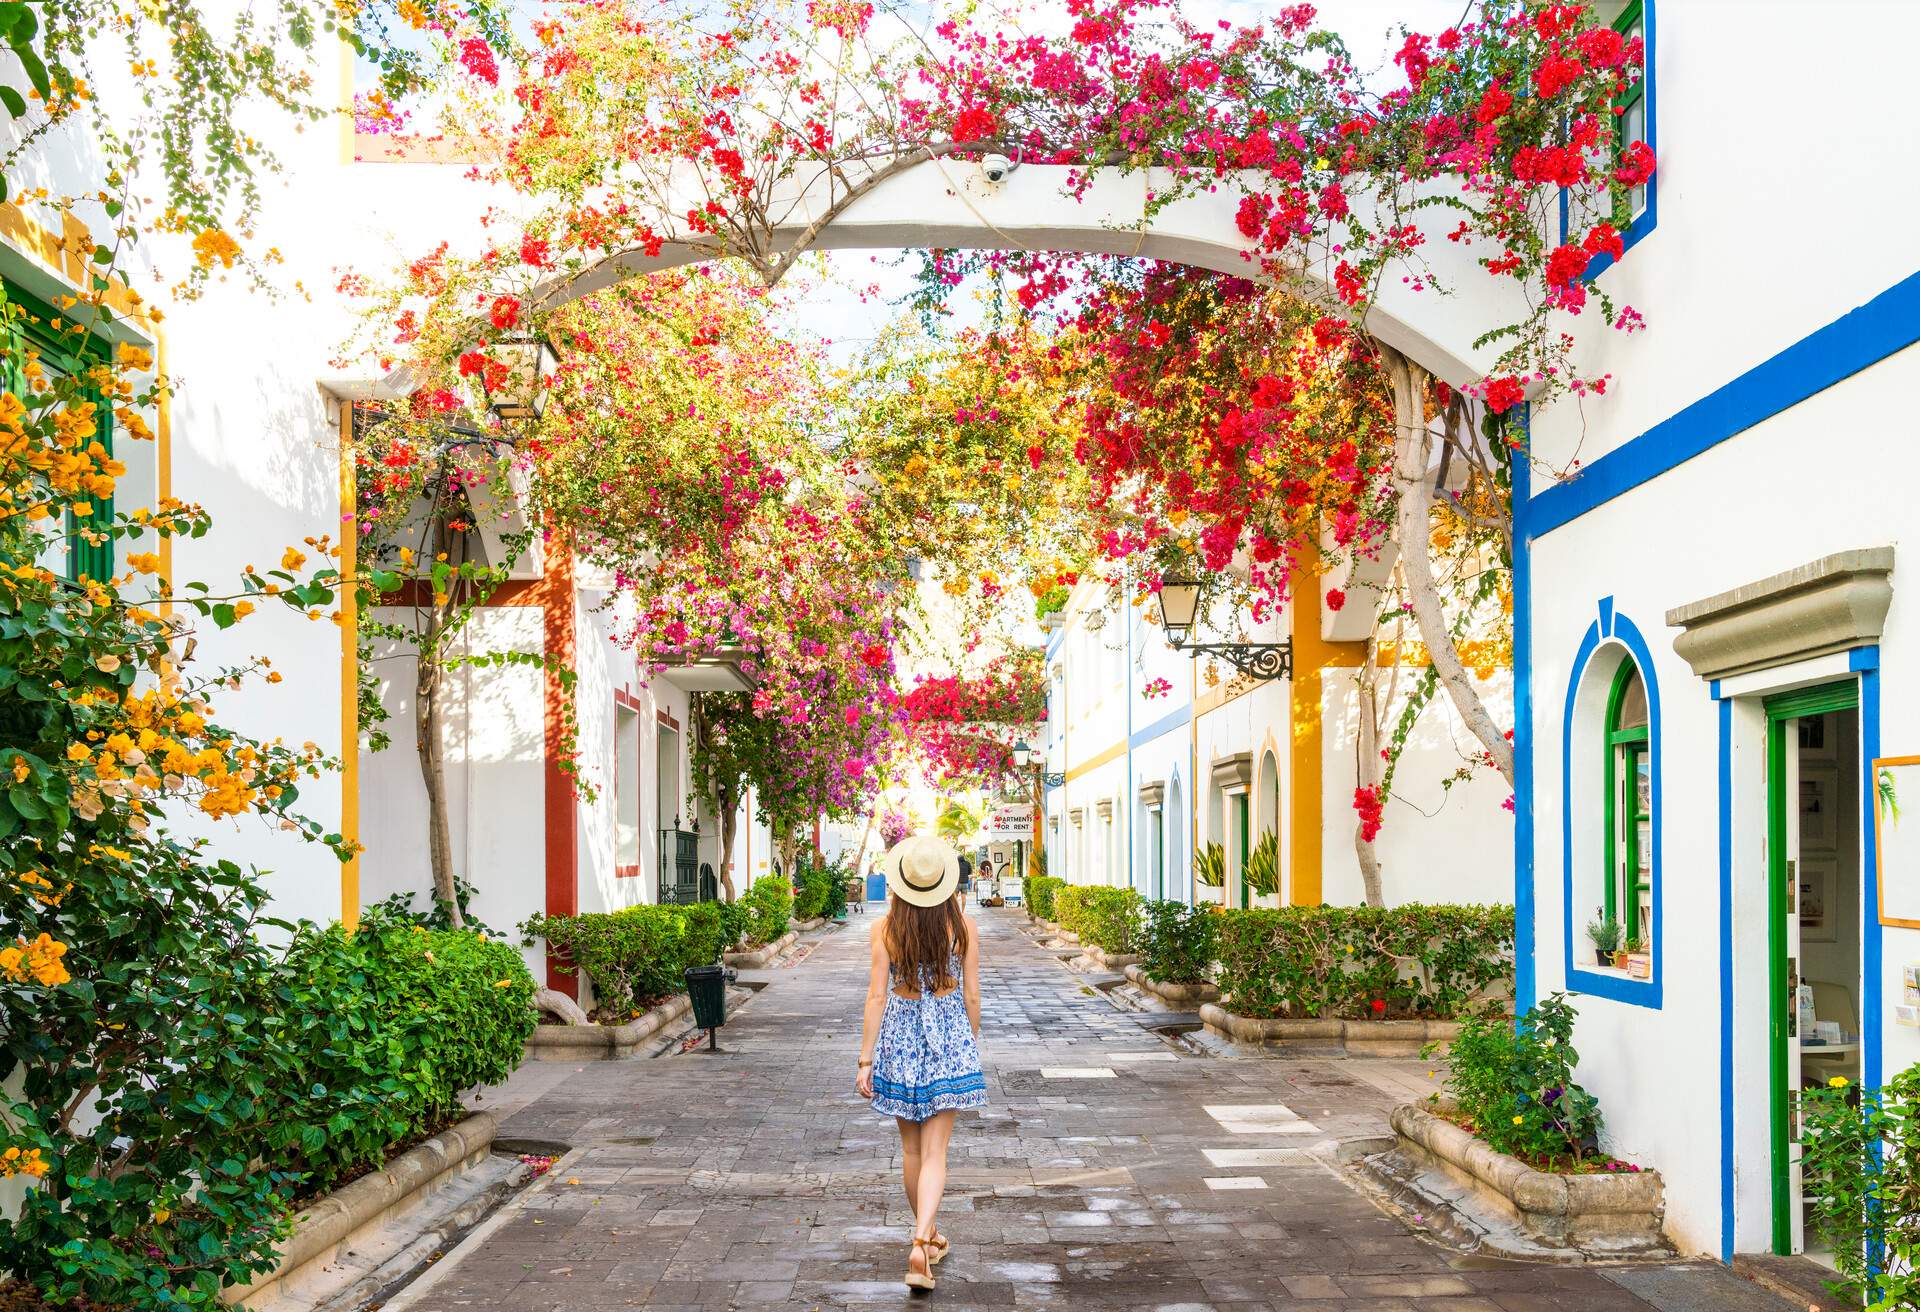 A woman in a hat walking down a paved street under a pergola of colourful flowers.